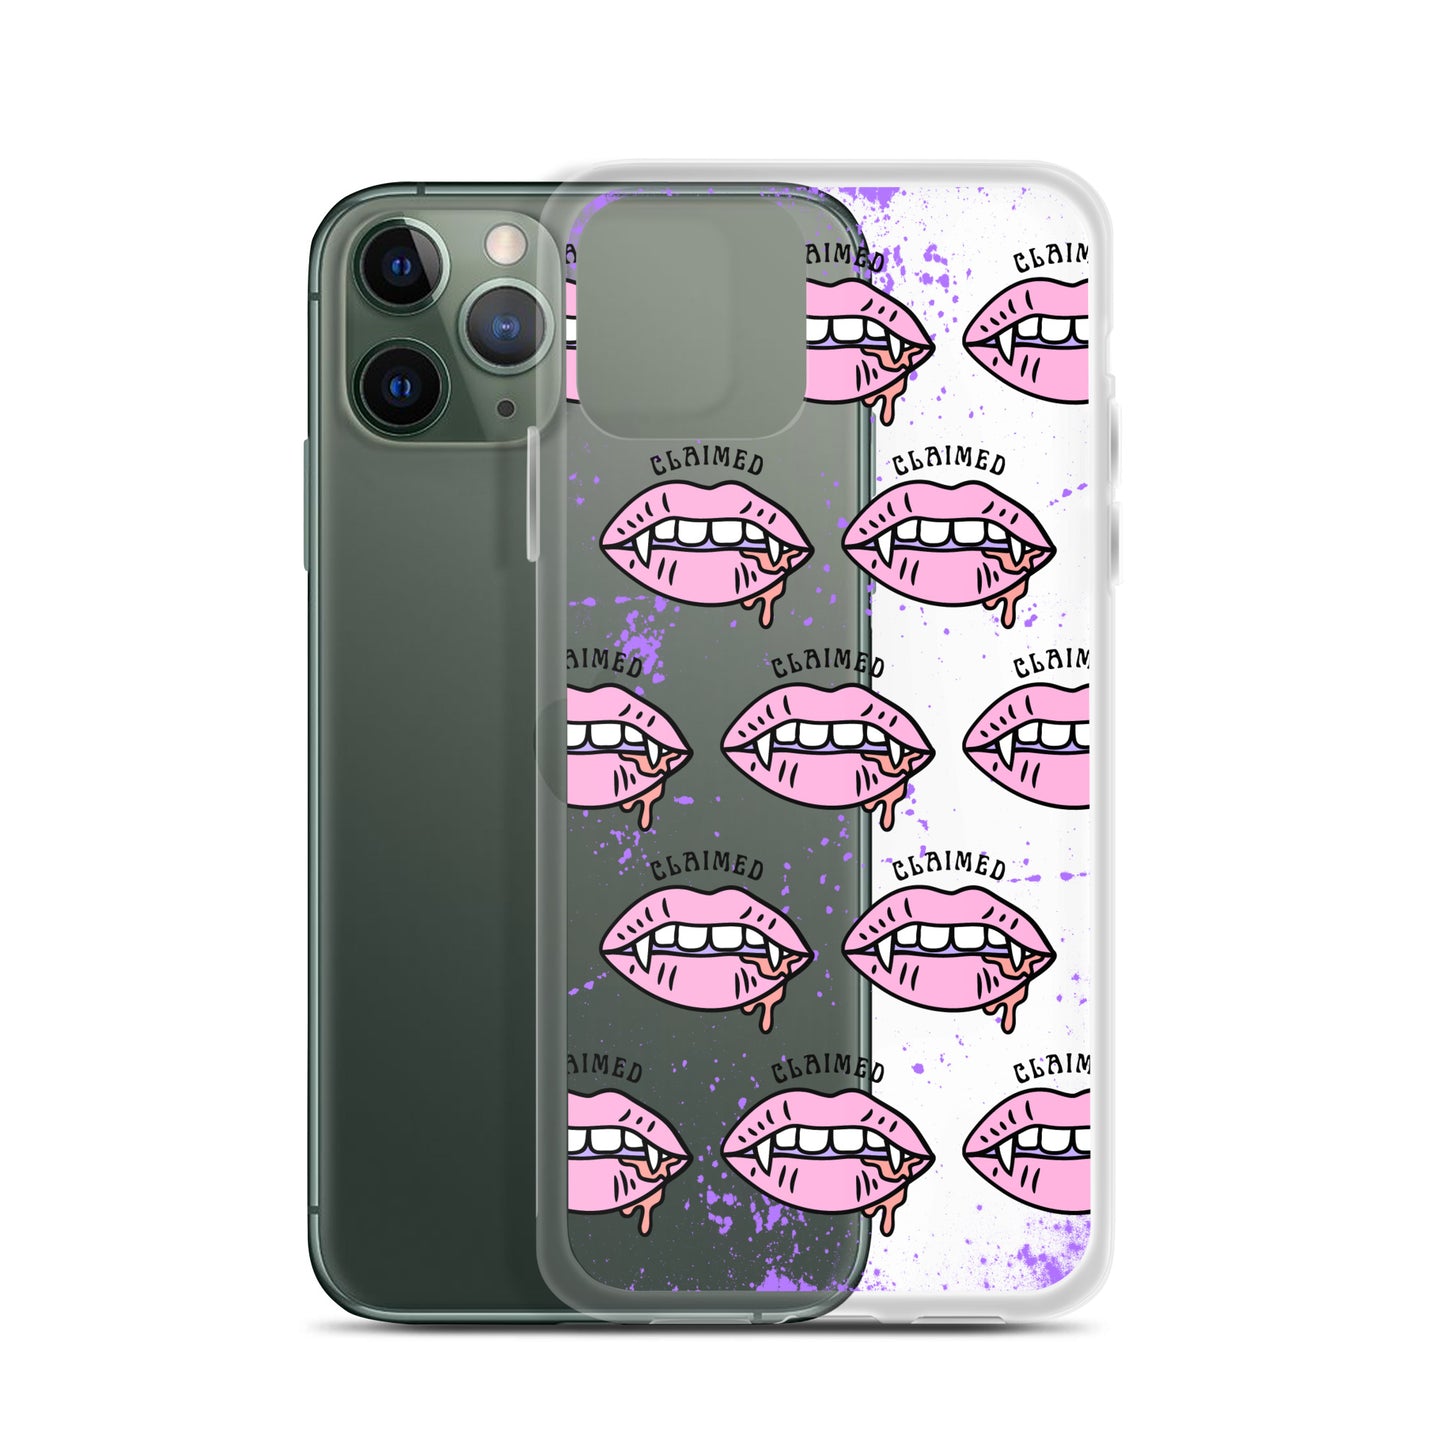 Claimed Pink iPhone Case